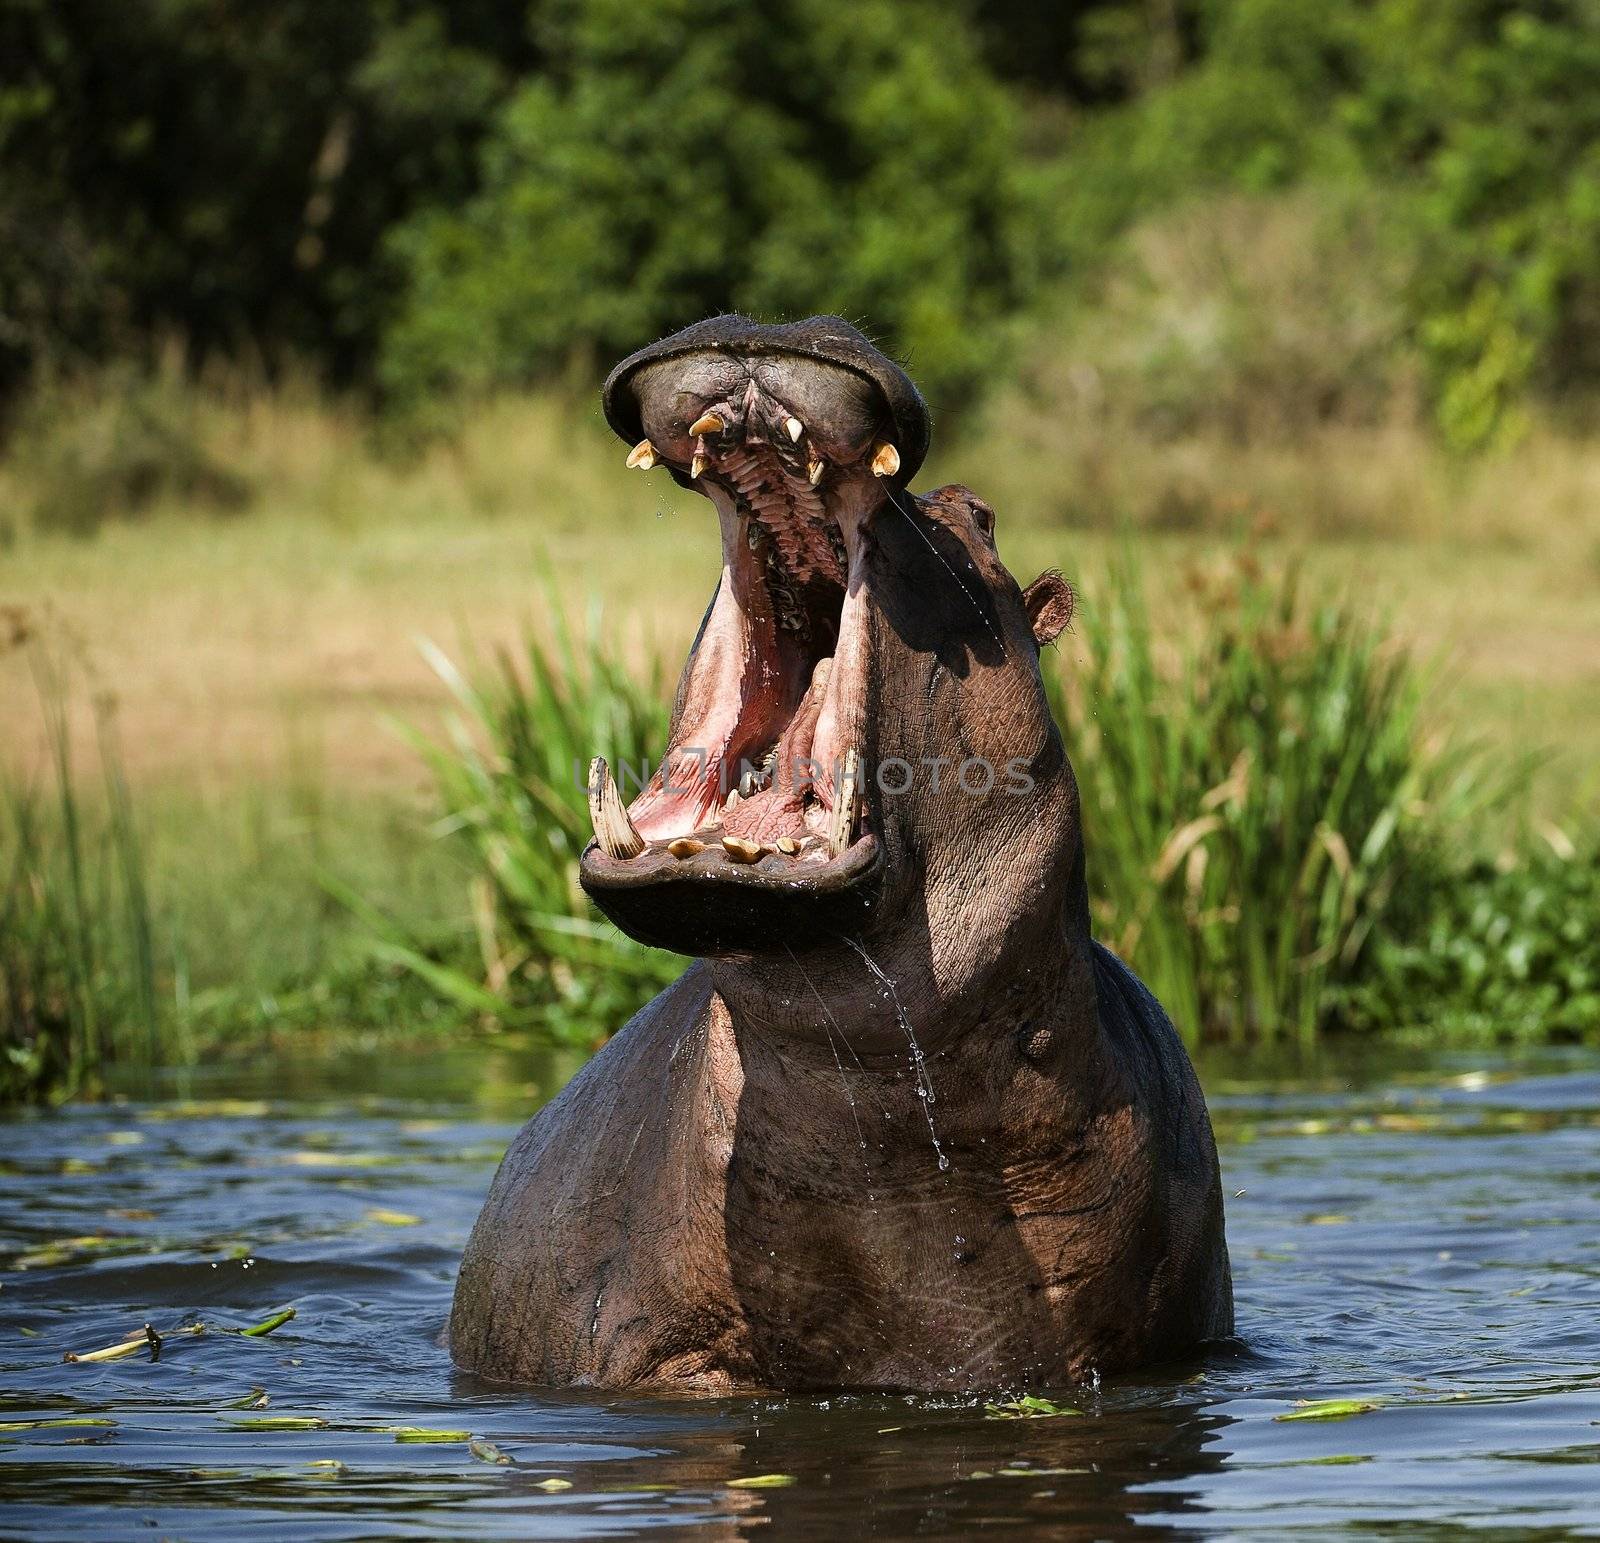 The hippopotamus (Hippopotamus amphibius), or hippo, from the ancient Greek for "river horse" (Ιπποπόταμος), is a large, mostly herbivorous mammal in sub-Saharan Africa, and one of only two extant species in the family Hippopotamidae (the other is the Pygmy Hippopotamus.)